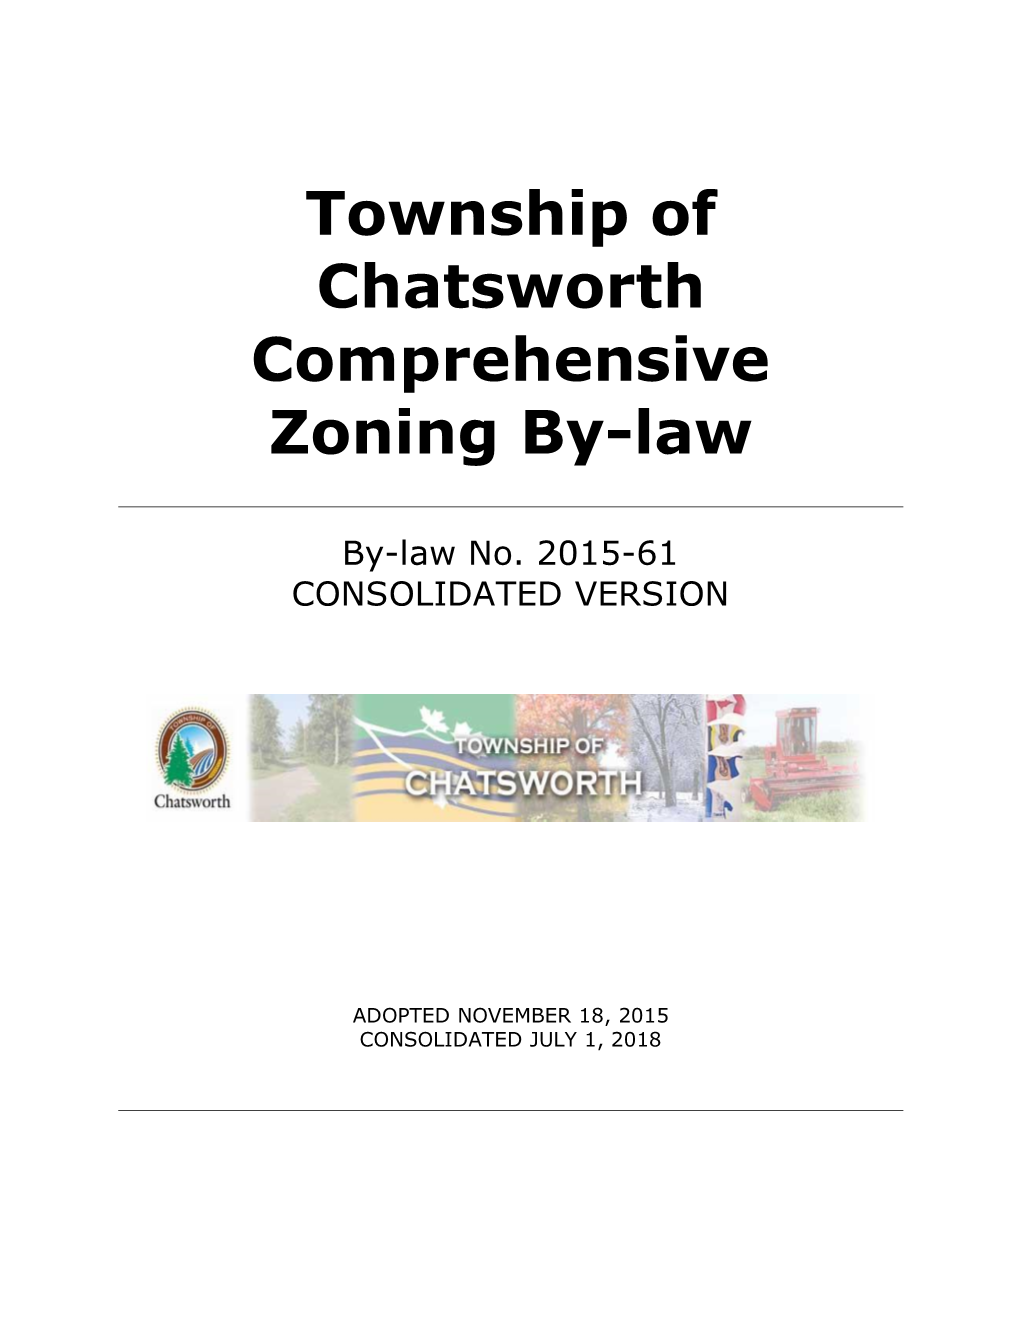 Download the Township of Chatsworth Comprehensive Zoning